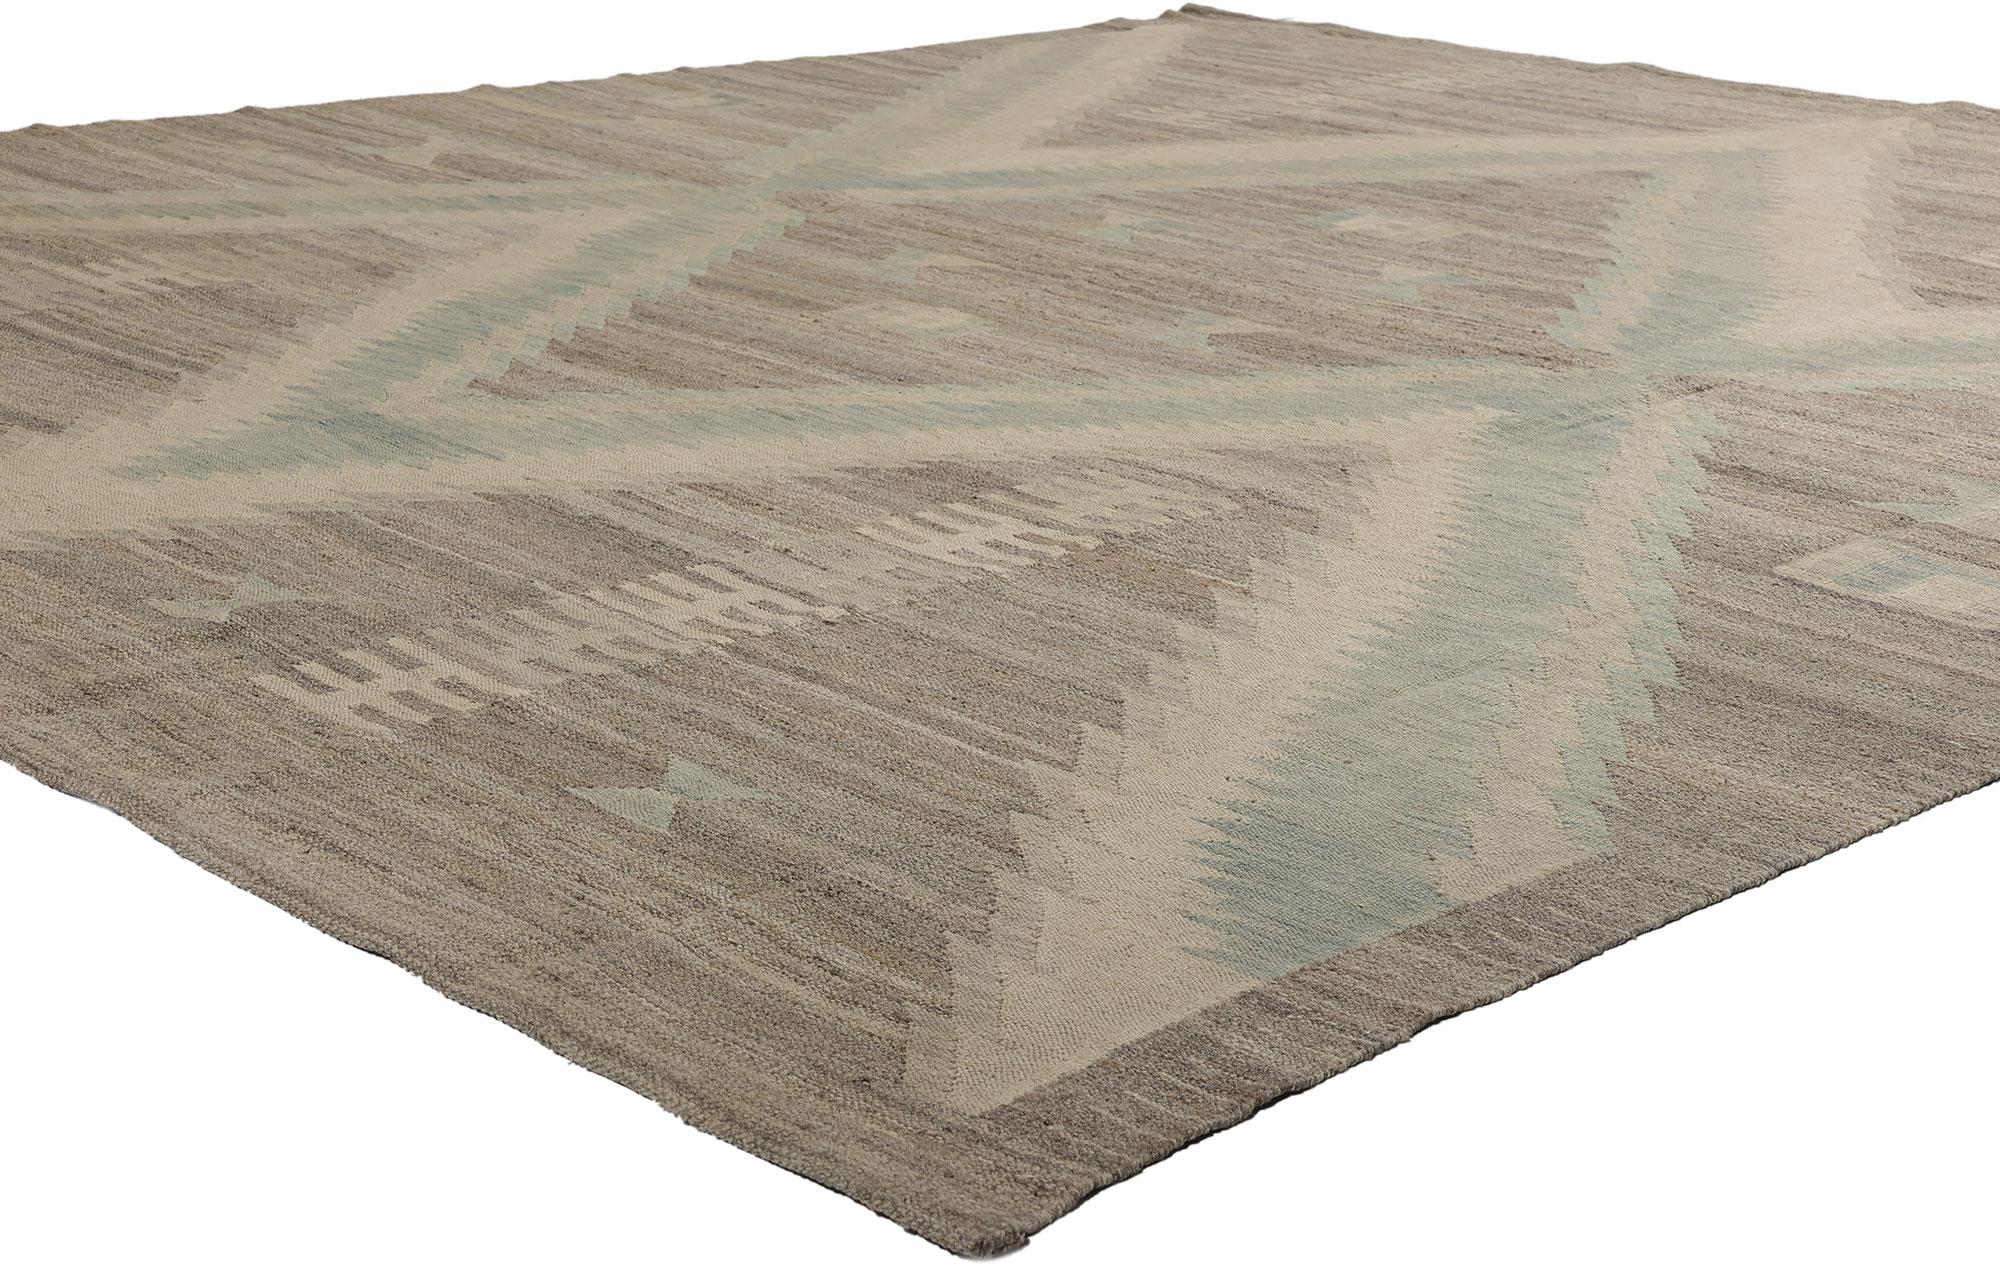 81094 Southwest Modern Desert Navajo-Style Rug, 08'00 x 09'05. Step into the enchanting realm of this handwoven wool Southwest Modern Desert Chic Navajo-style rug, where each thread whispers tales of tradition and modernity interwoven in harmony.